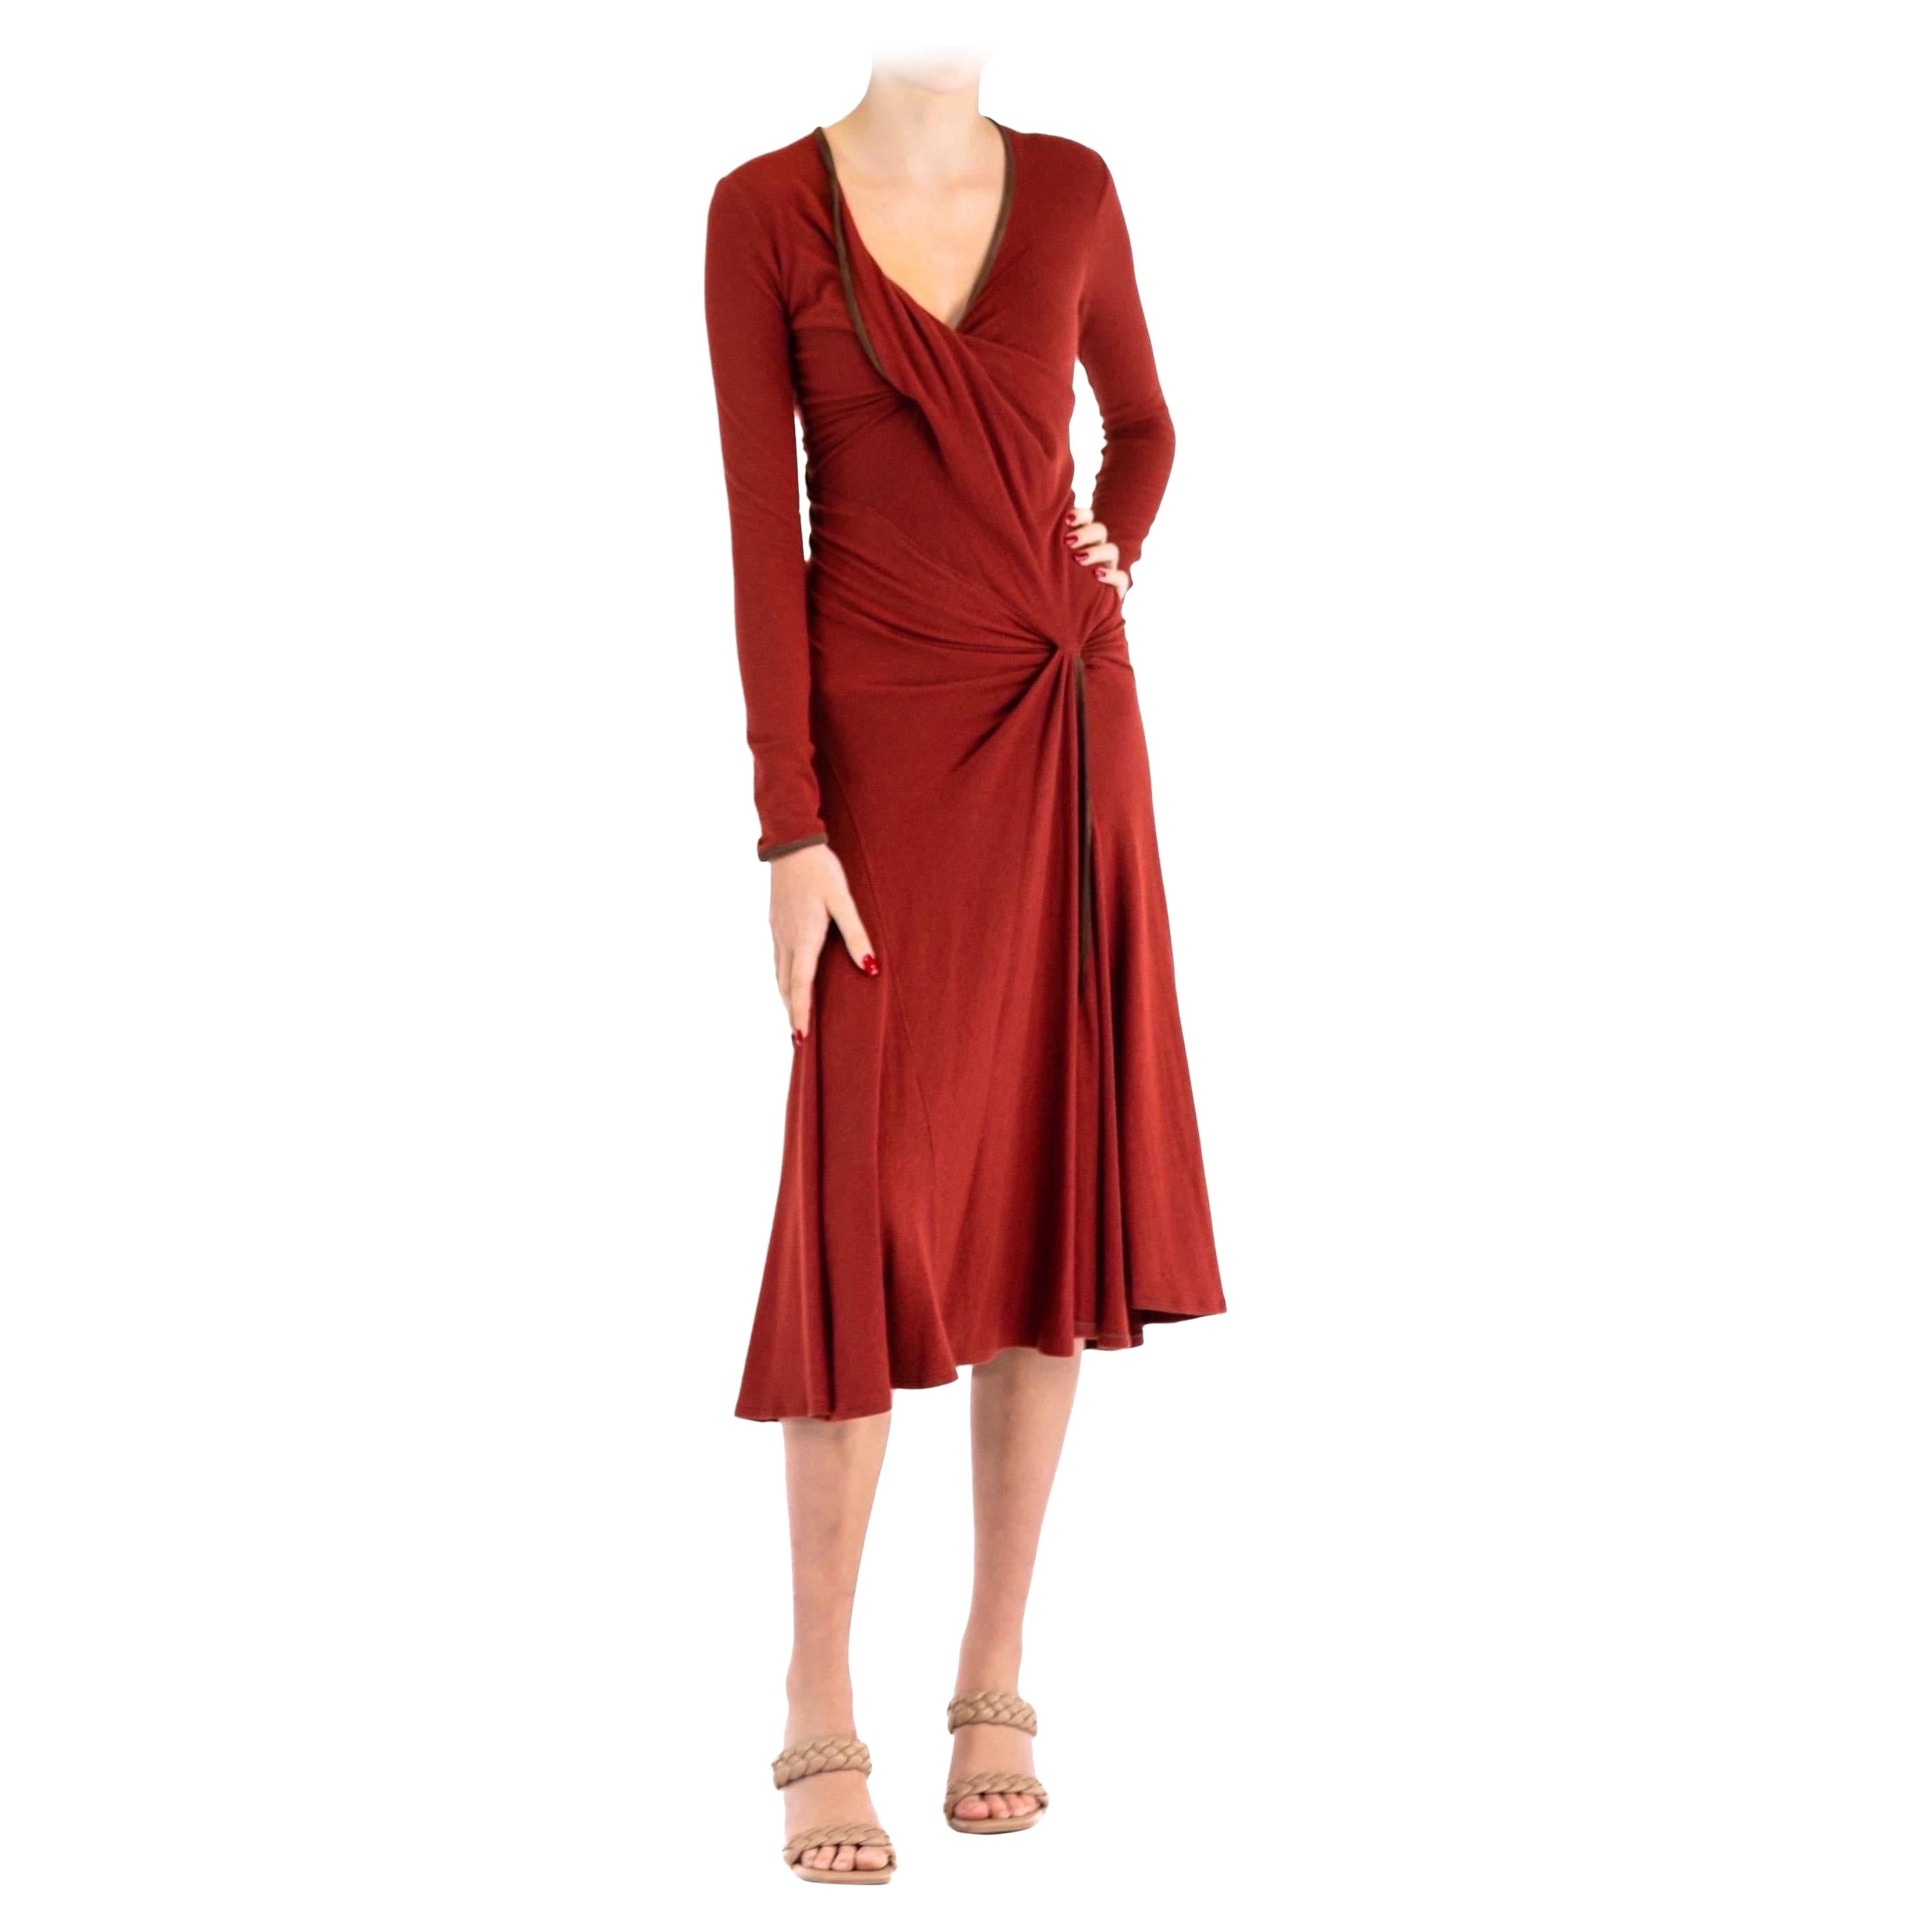 2000S DONNA KARAN Rust Red Wool Blend Jersey Dress With Lambskin Suede Trim For Sale